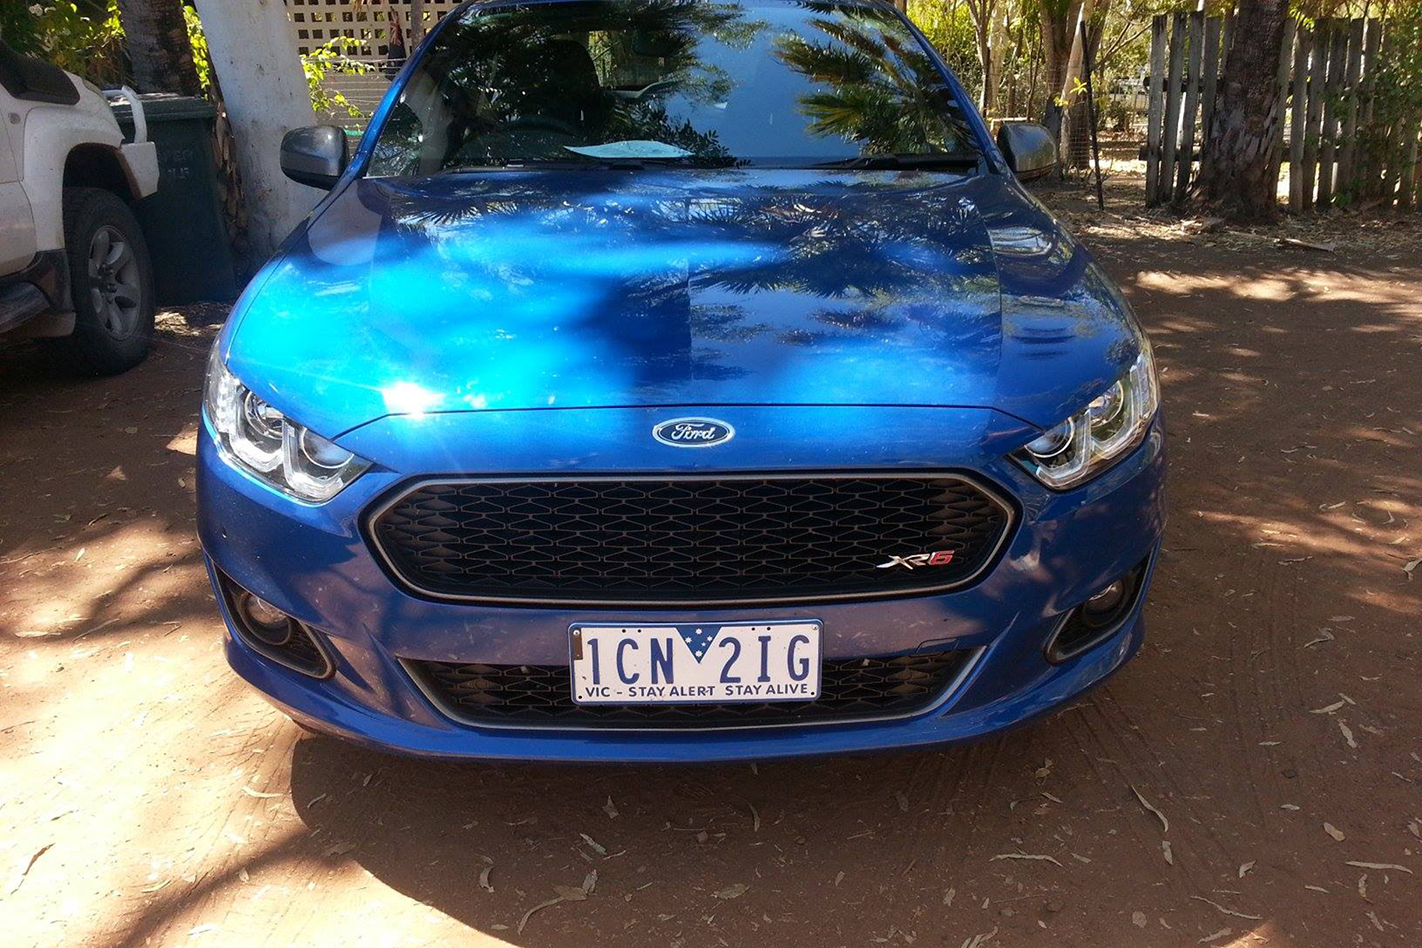 Exclusive Ford Fg X Falcon Xr6 Turbo In Detail